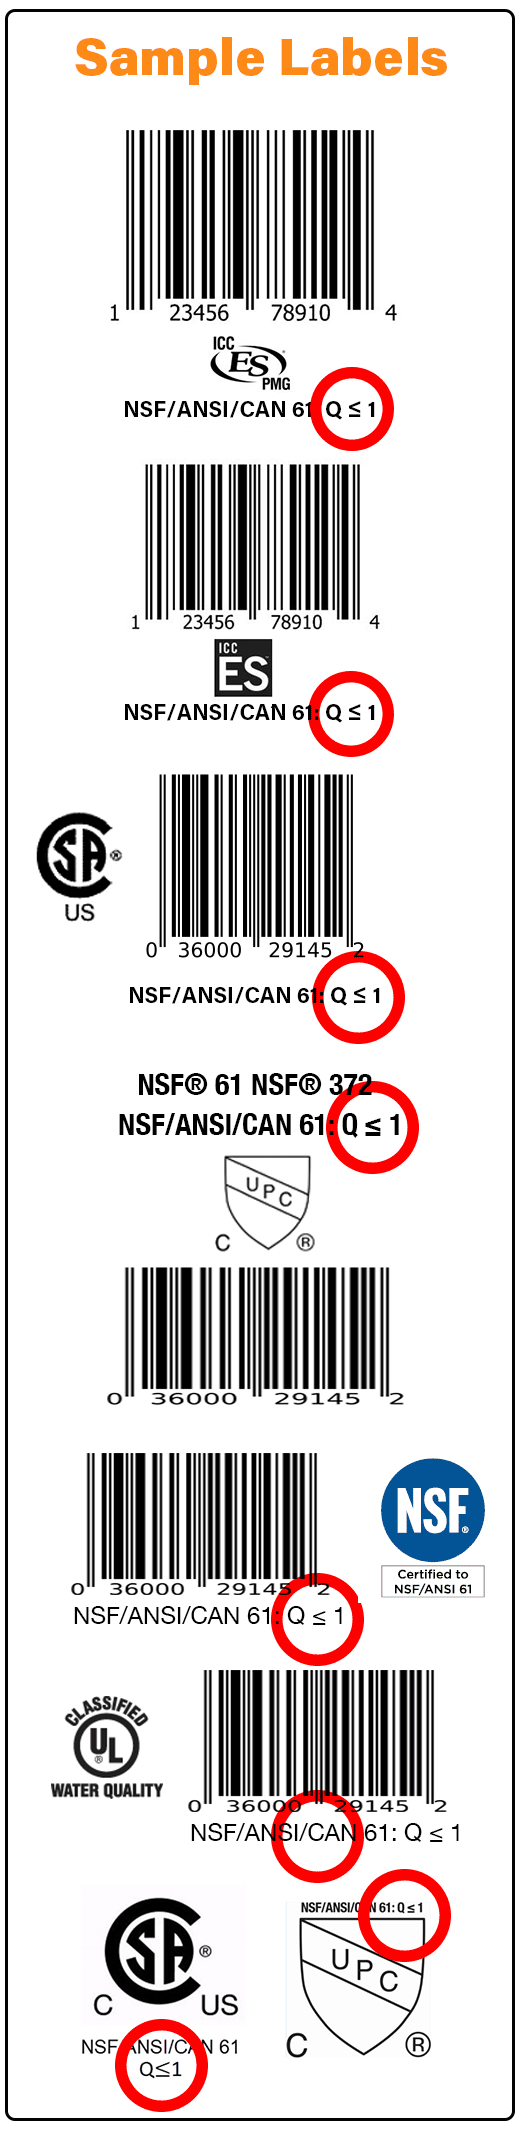 Sample product labels show where to look for the Q is less than or equal to 1 marking.